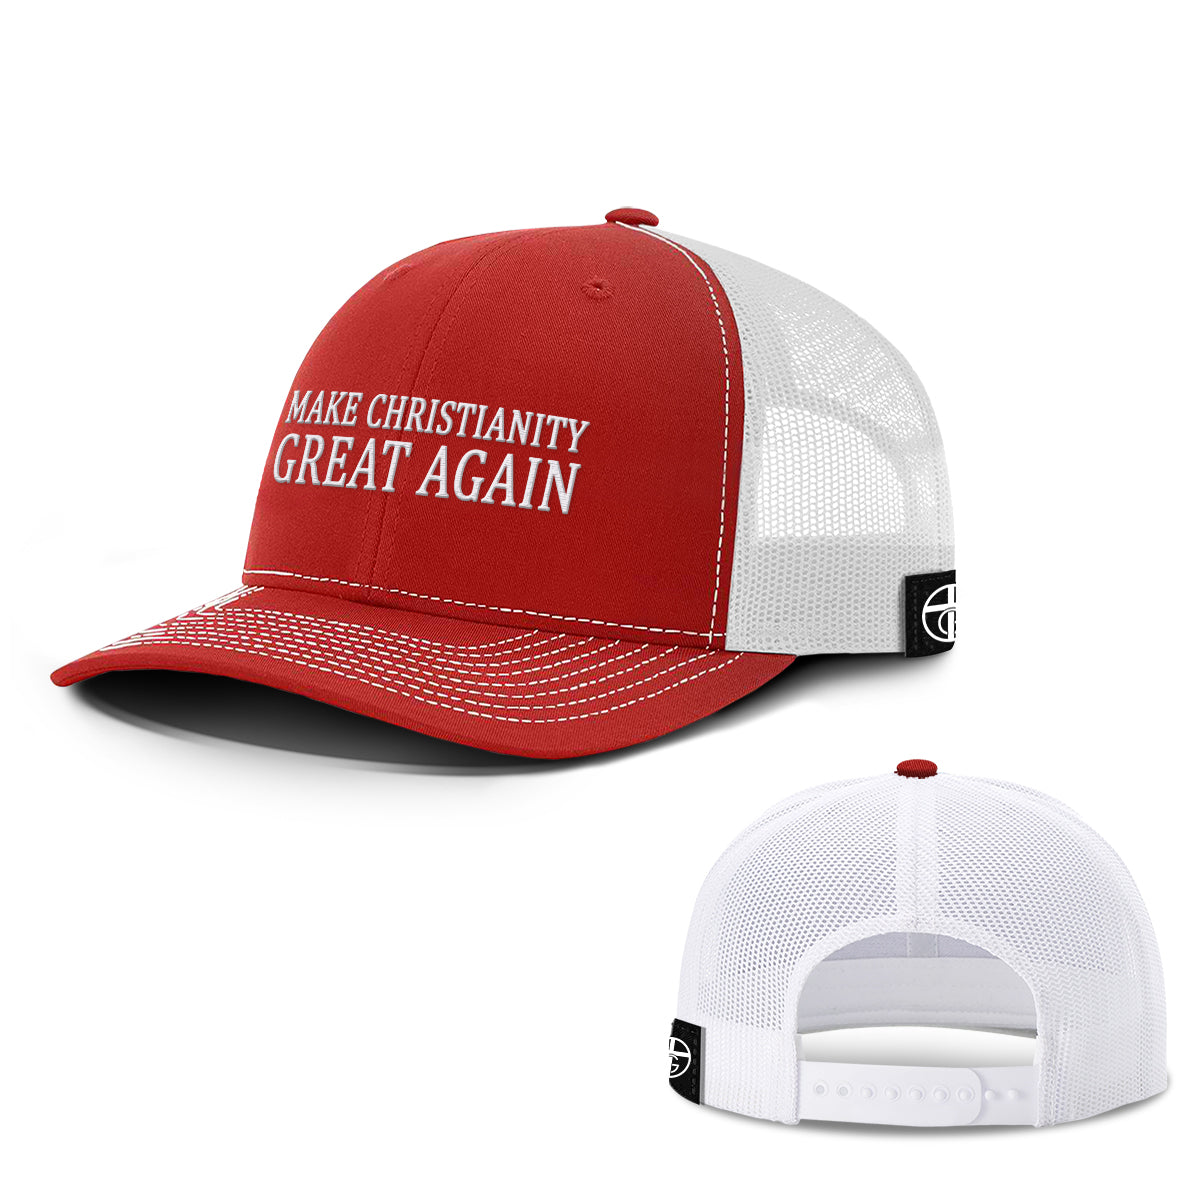 Make Christianity Great Again Hats